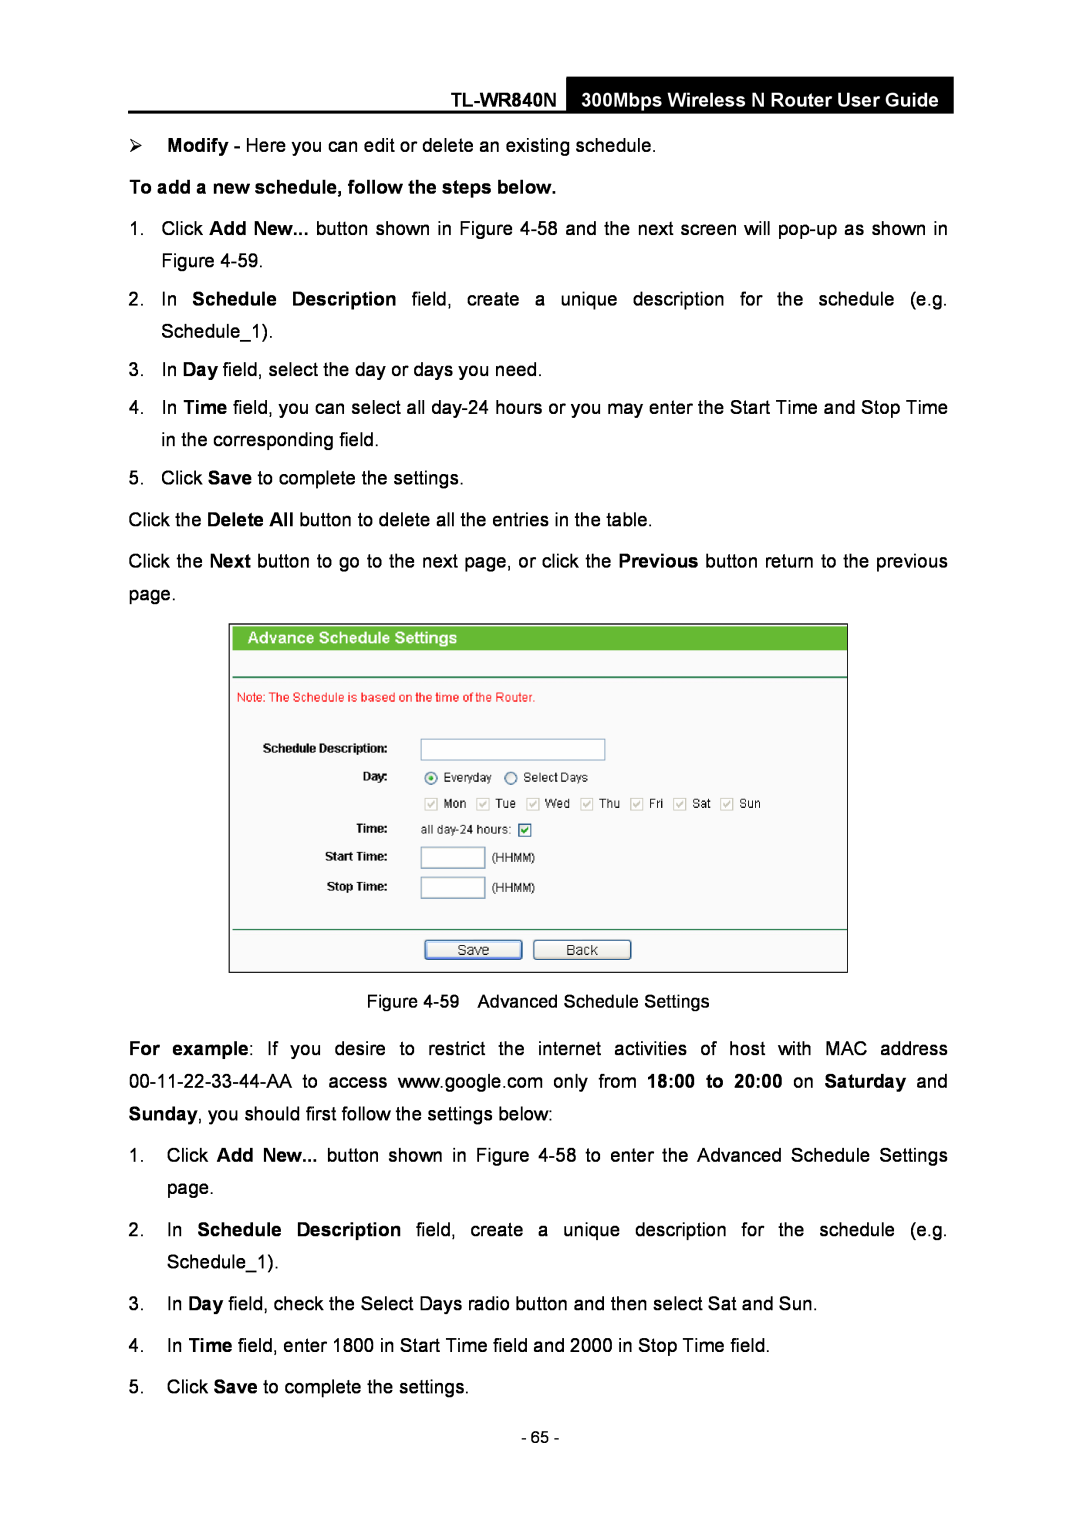 TP-Link manual To add a new schedule, follow the steps below, TL-WR840N 300Mbps Wireless N Router User Guide 